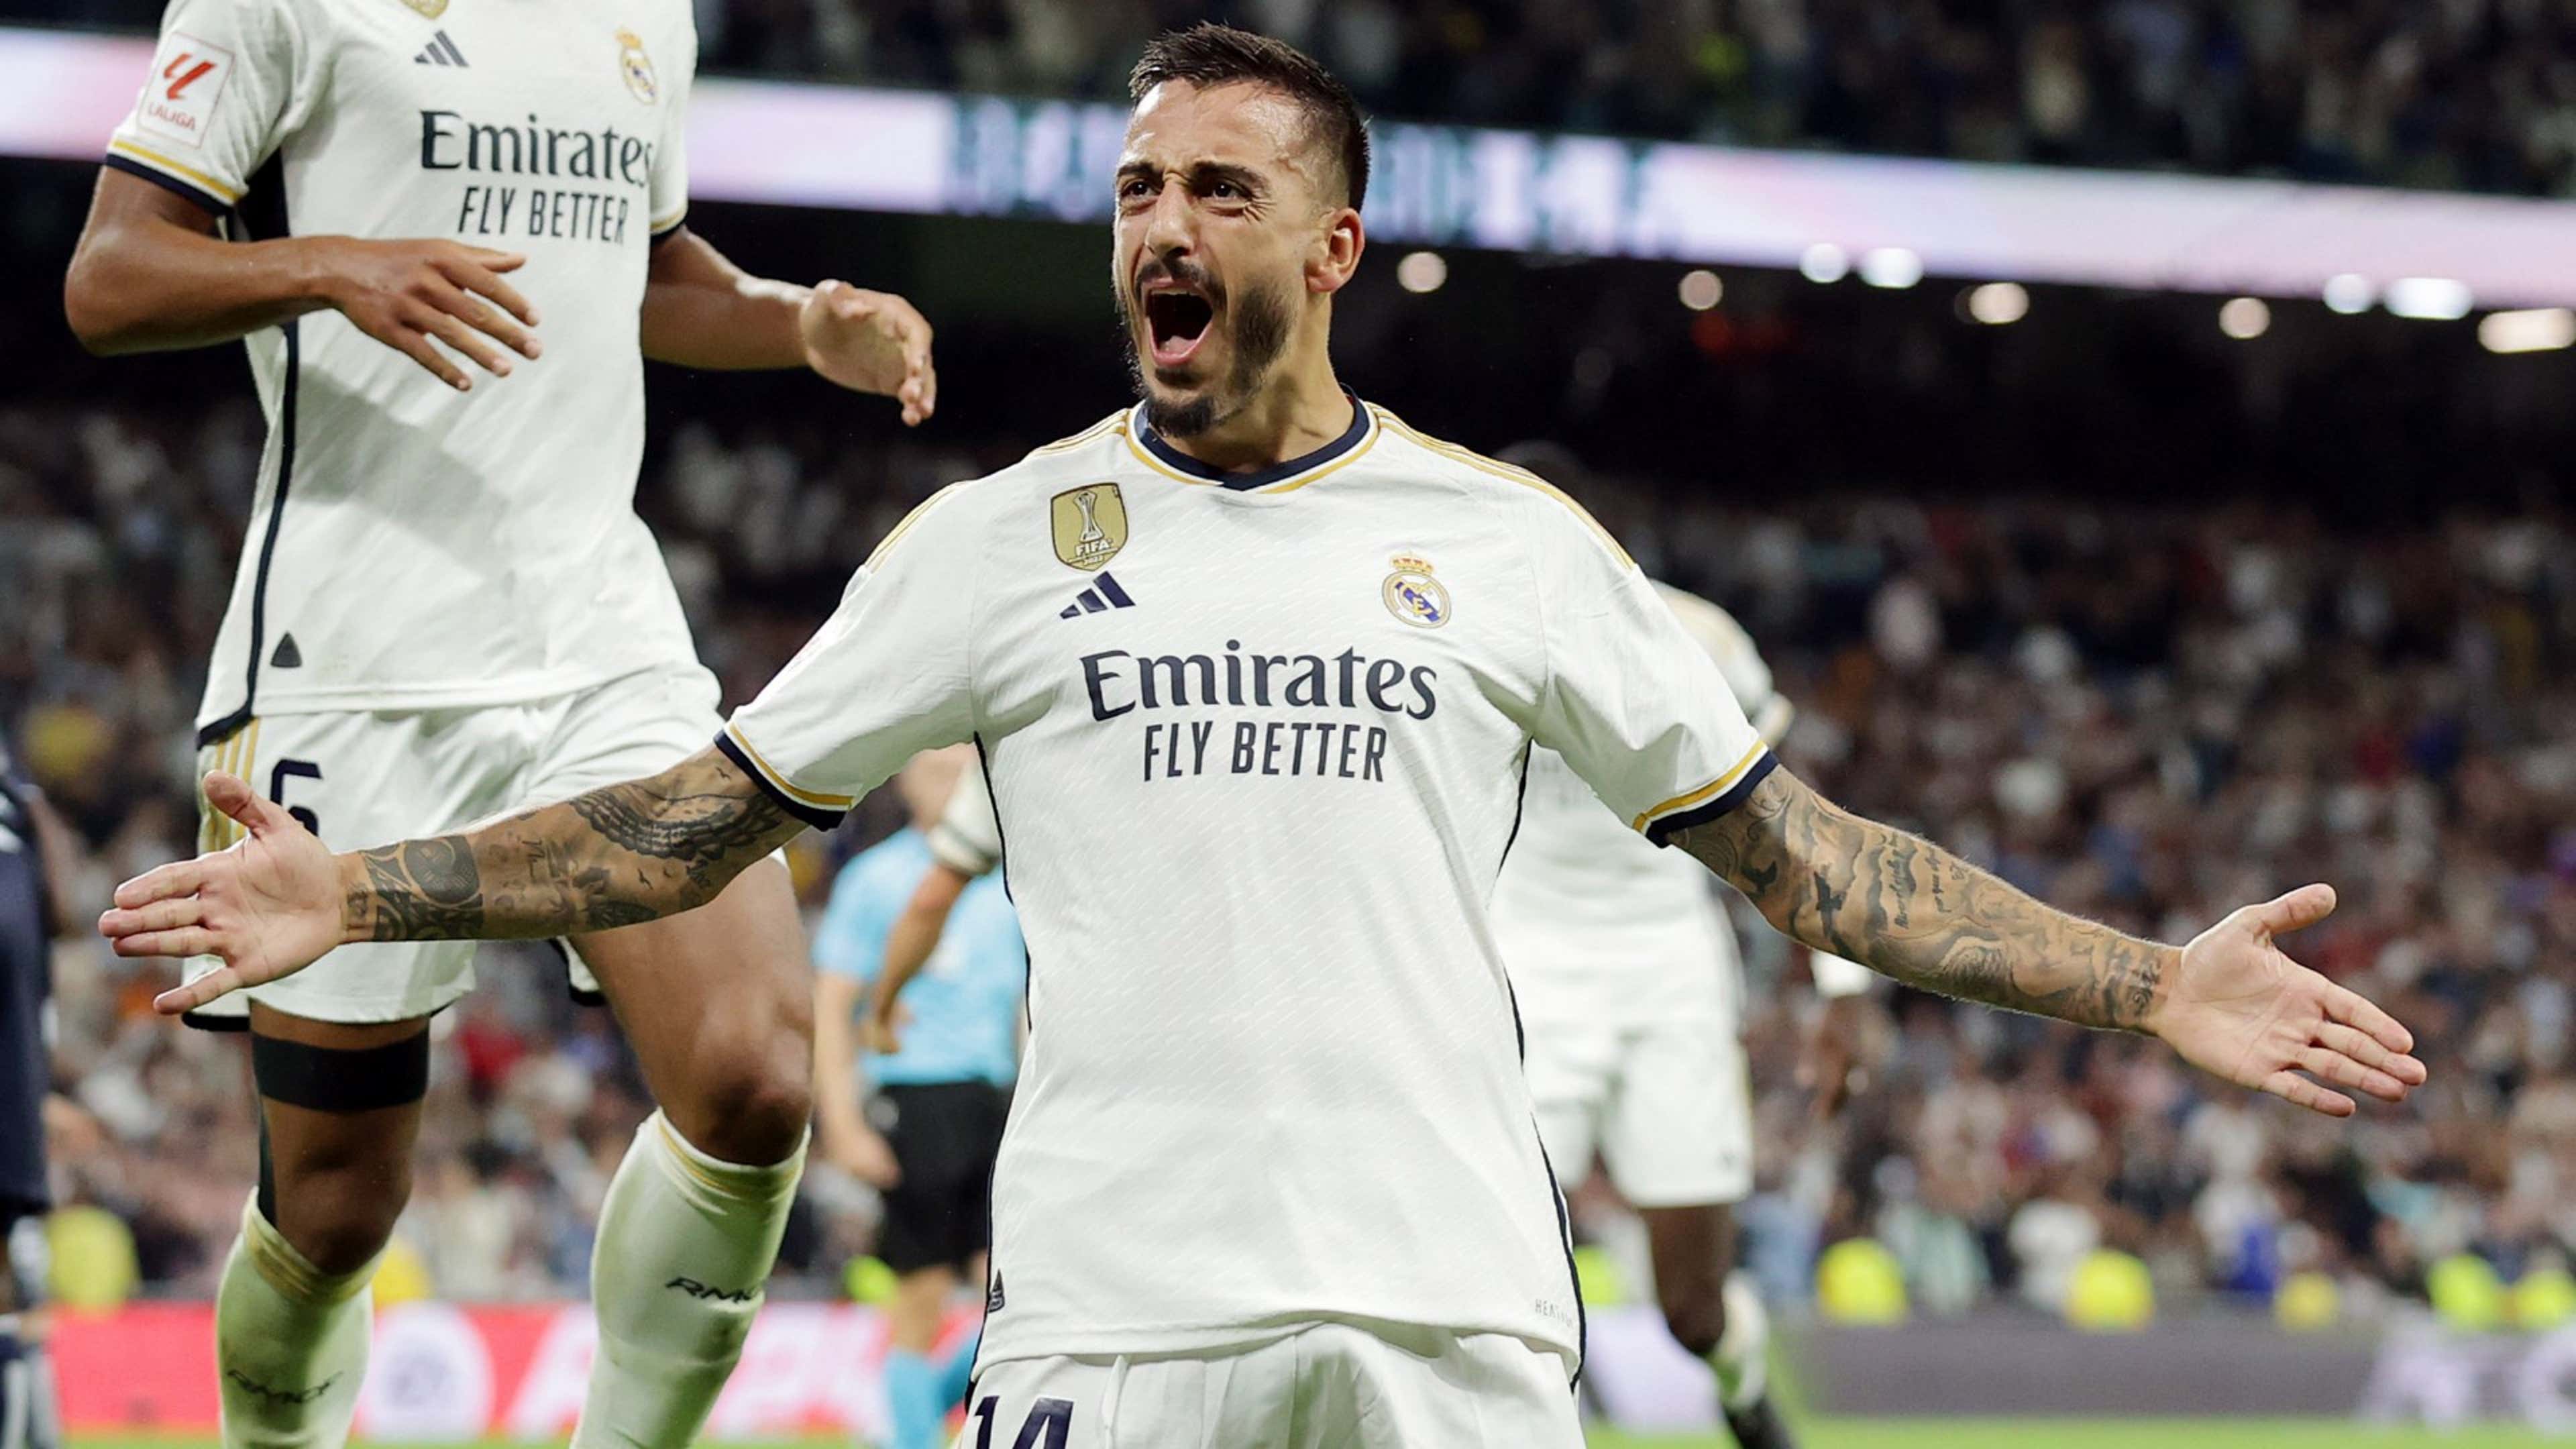  Joselu celebrates his second goal against Bayern Munich, helping Real Madrid complete an impressive comeback.